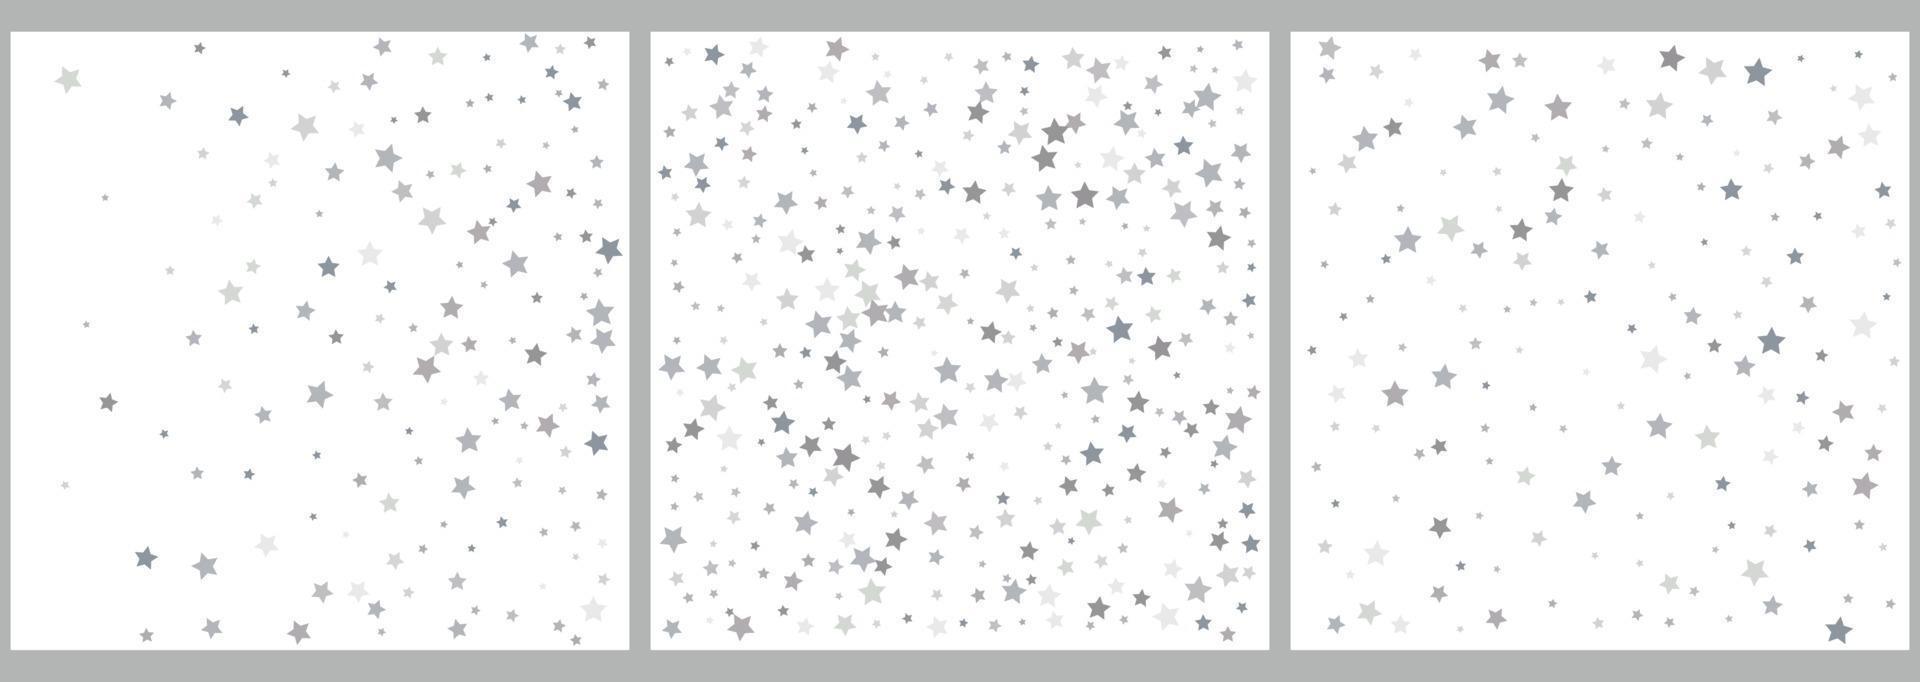 Silver glitter stars falling from the sky on white background vector